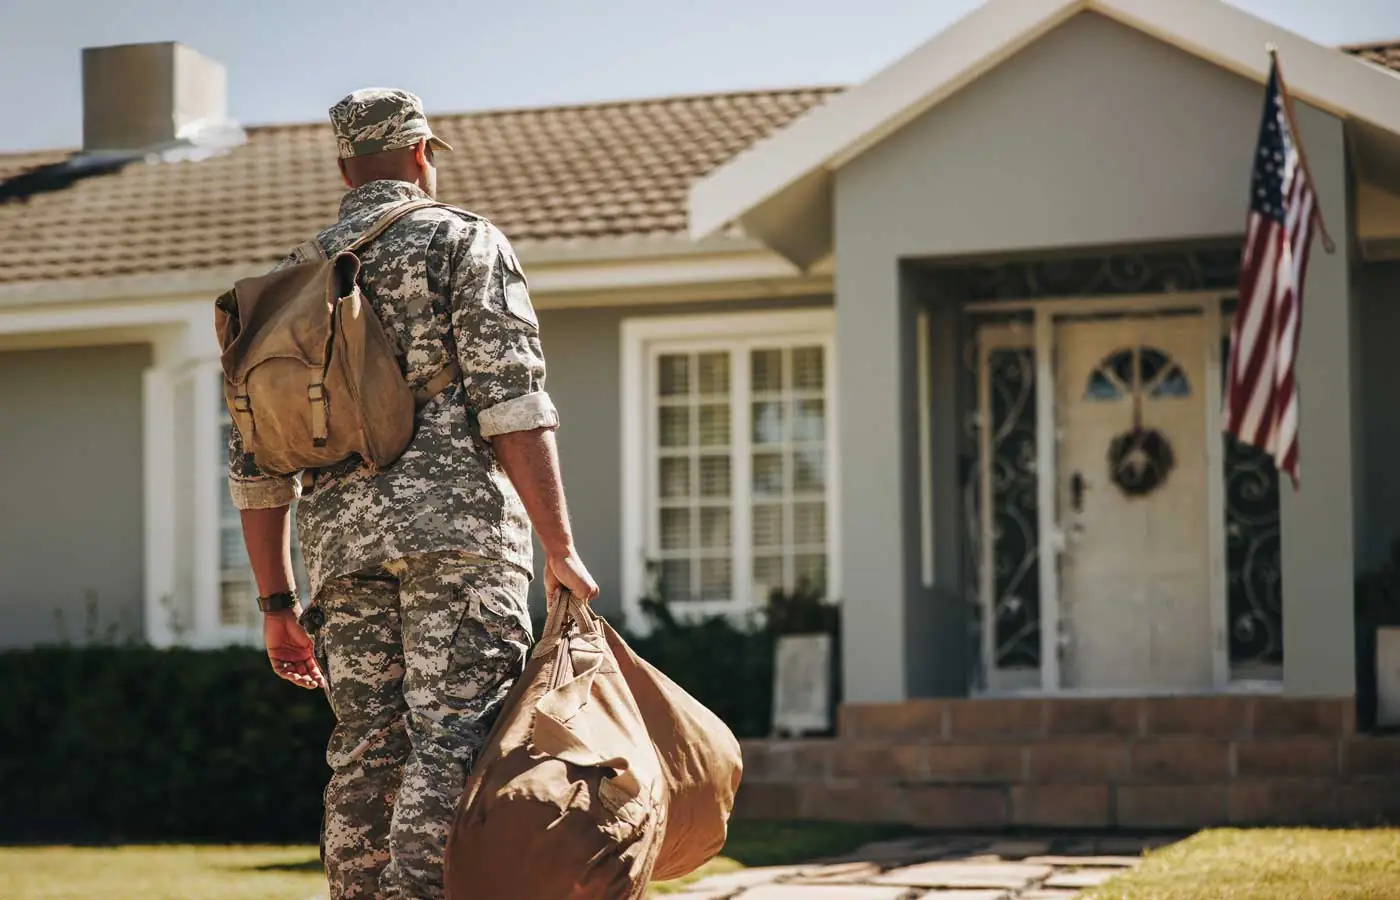 Image of a man in uniform returning home depicting the military transition to civilian life.